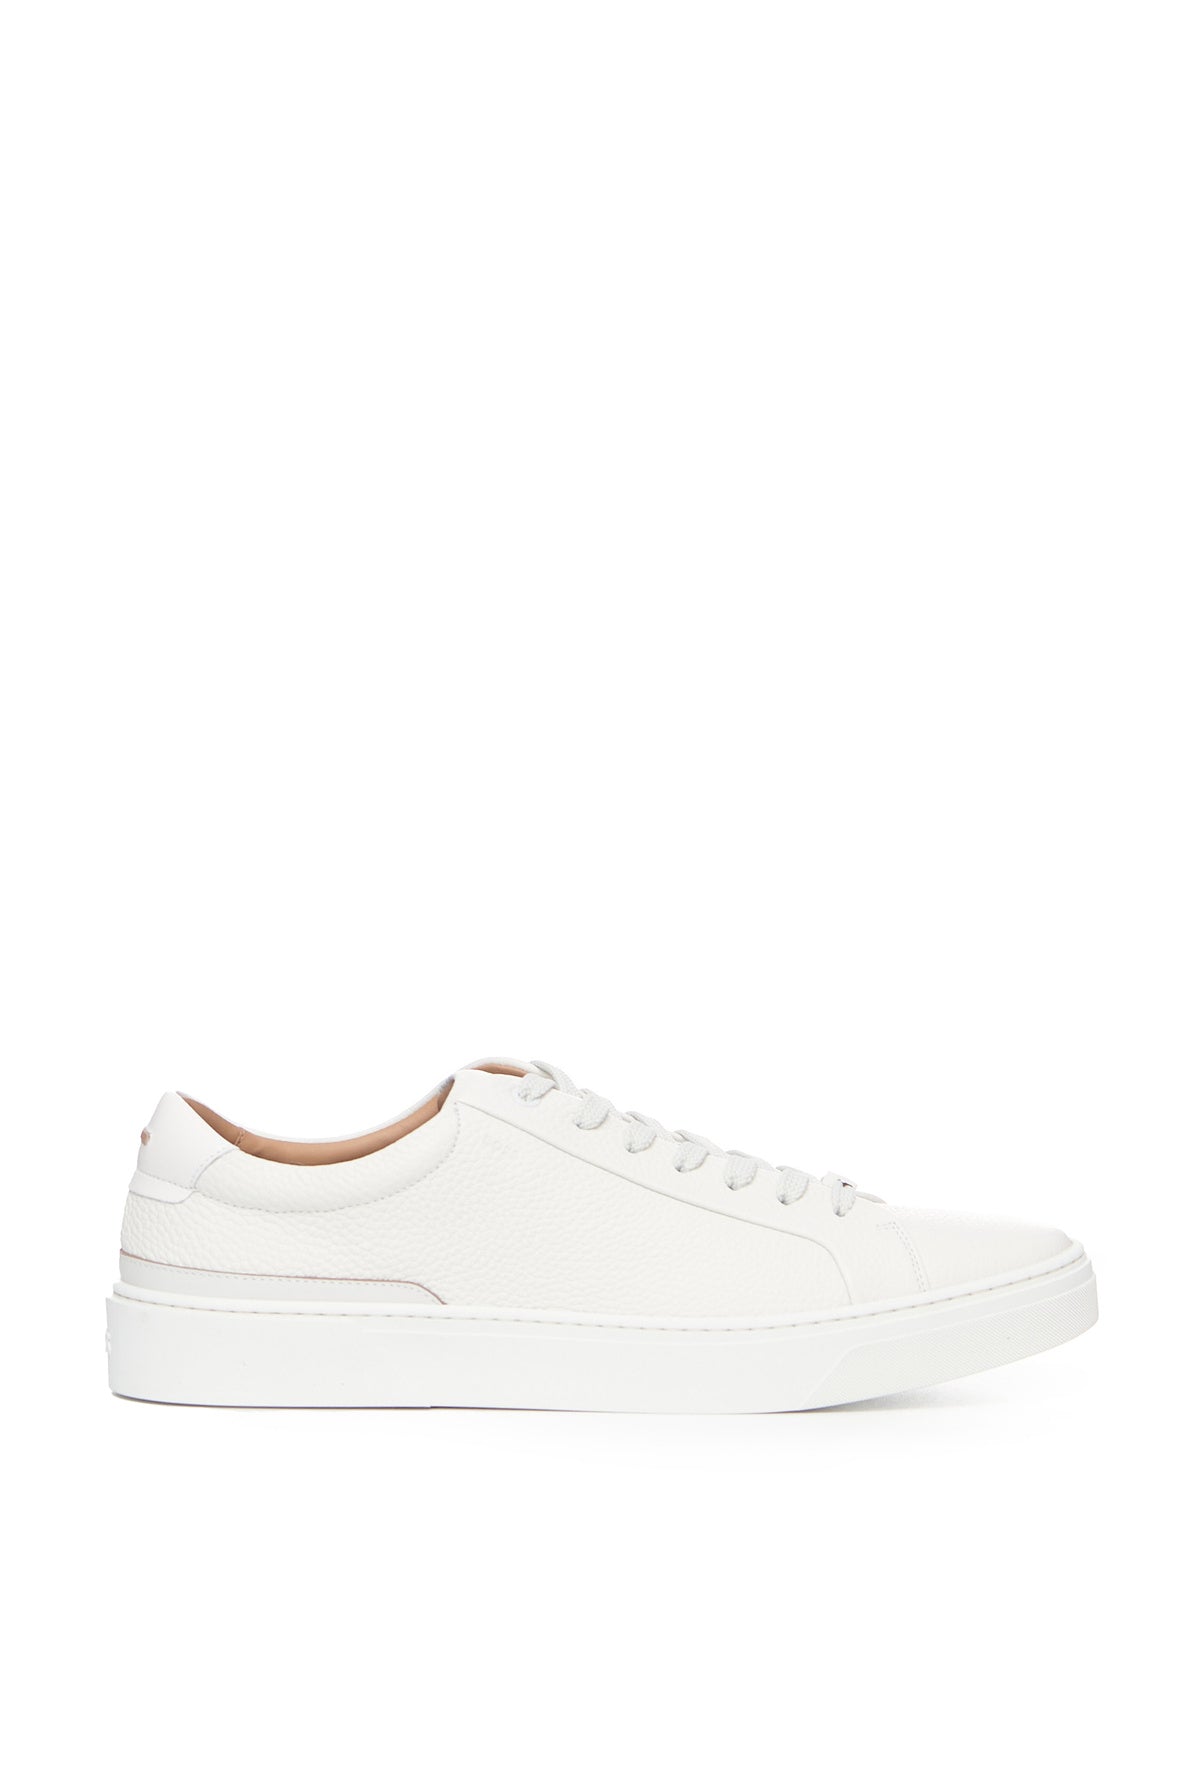 Hugo Boss Men's Gary Tennis White Grained Leather Lace Up Sneakers Shoes